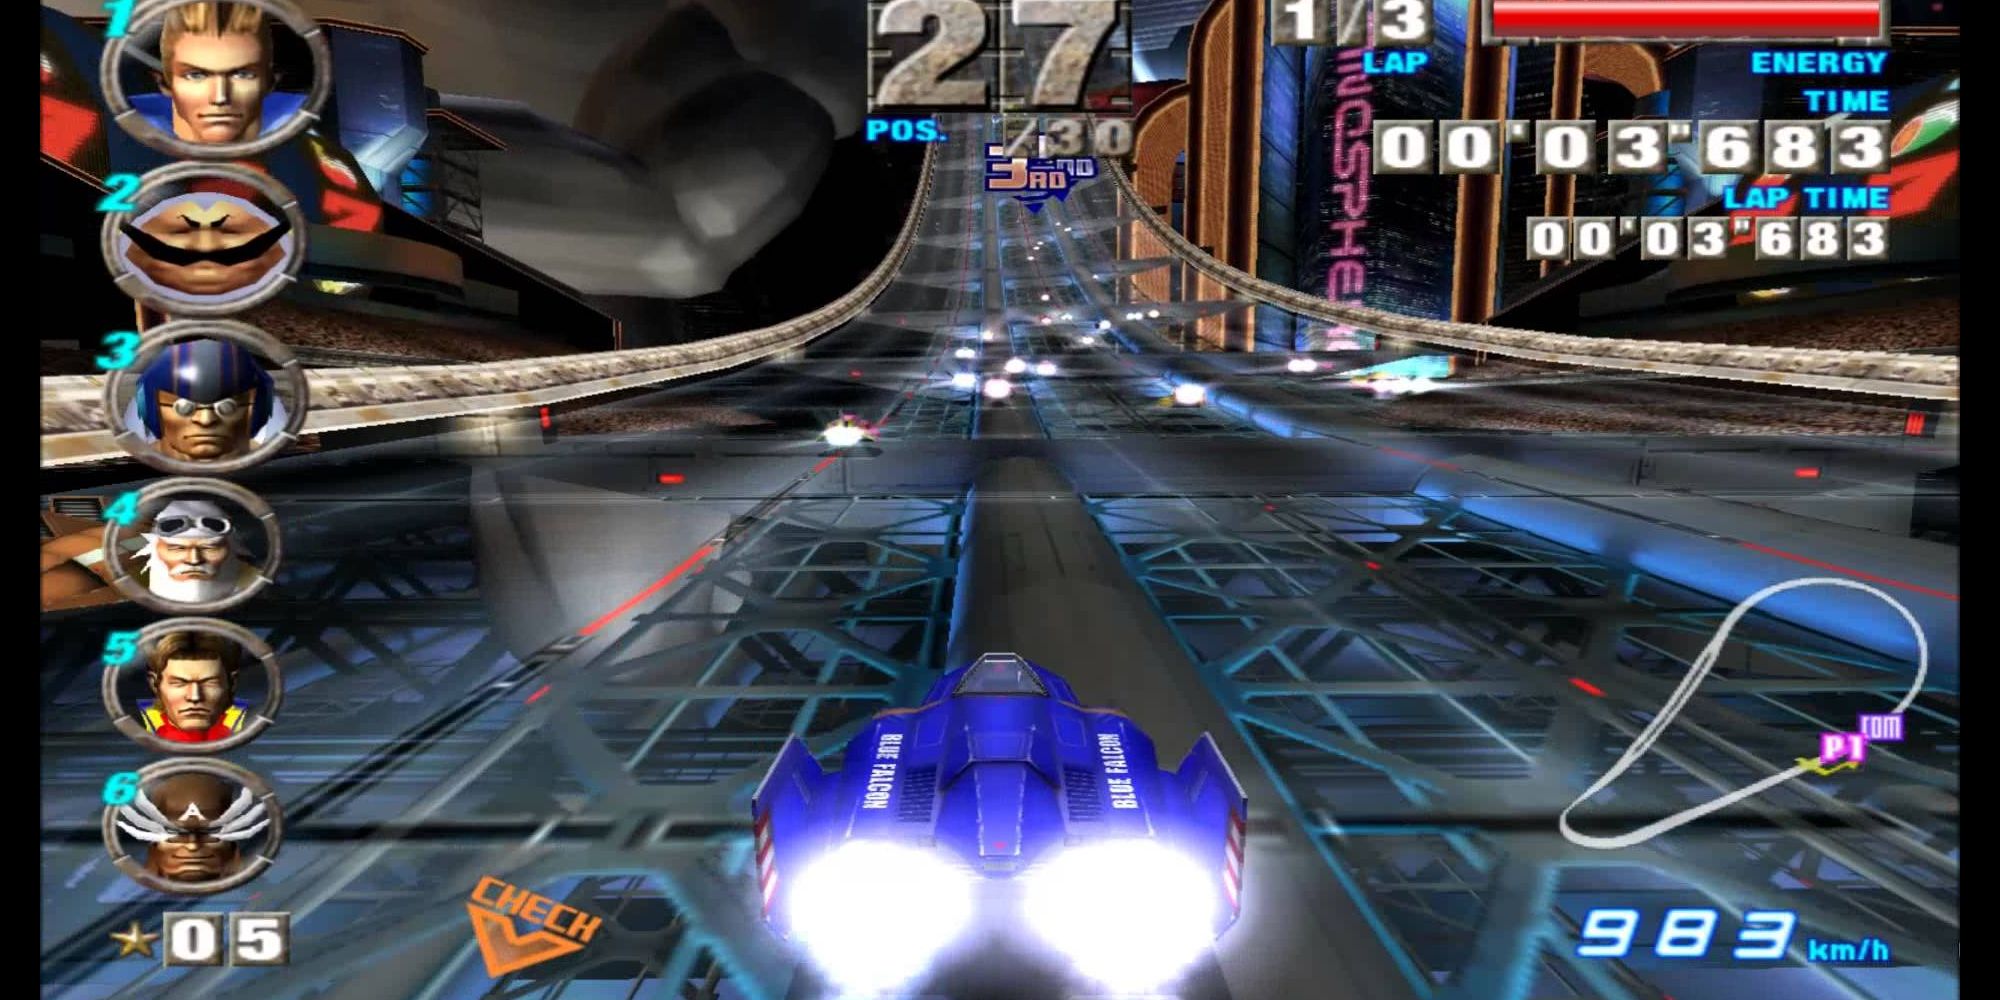 Player is racing in fourth place on lap one in F-Zero GX